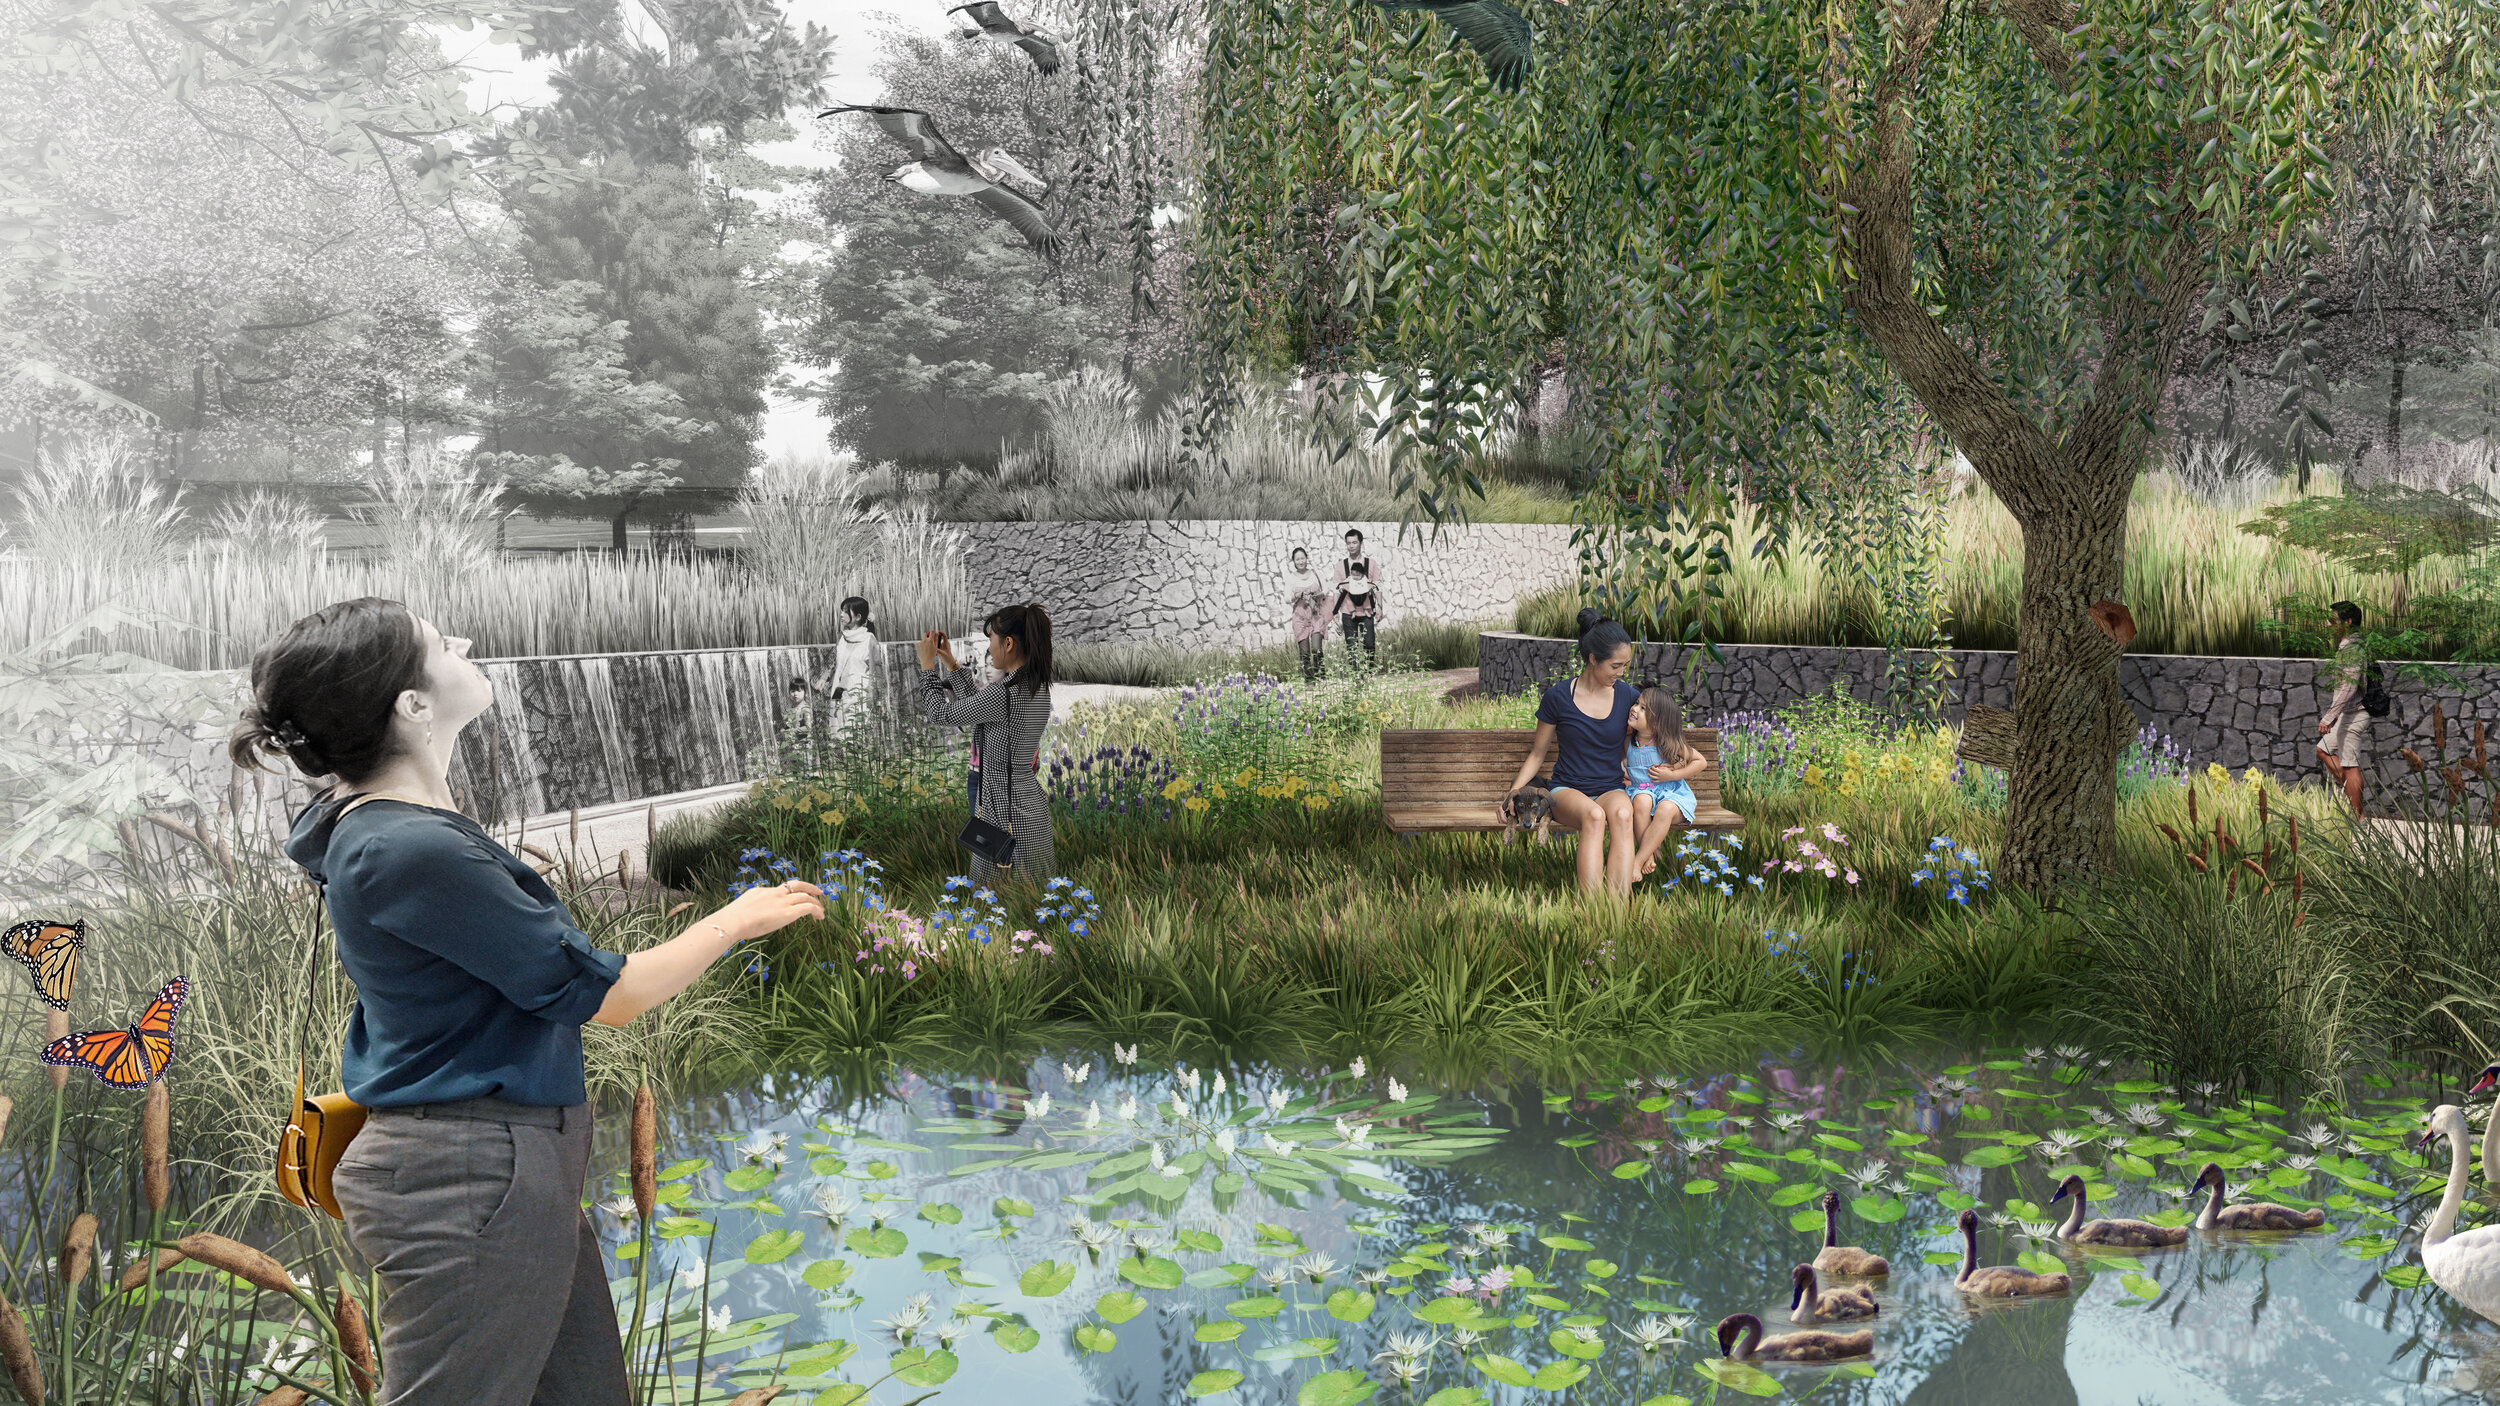  The wetland forest terraces create a variety of opportunities for park patrons to engage water.&nbsp; The stepped topography defines more intimate, human-scaled spaces for people to find moments of relief and reflection within the nature park.  